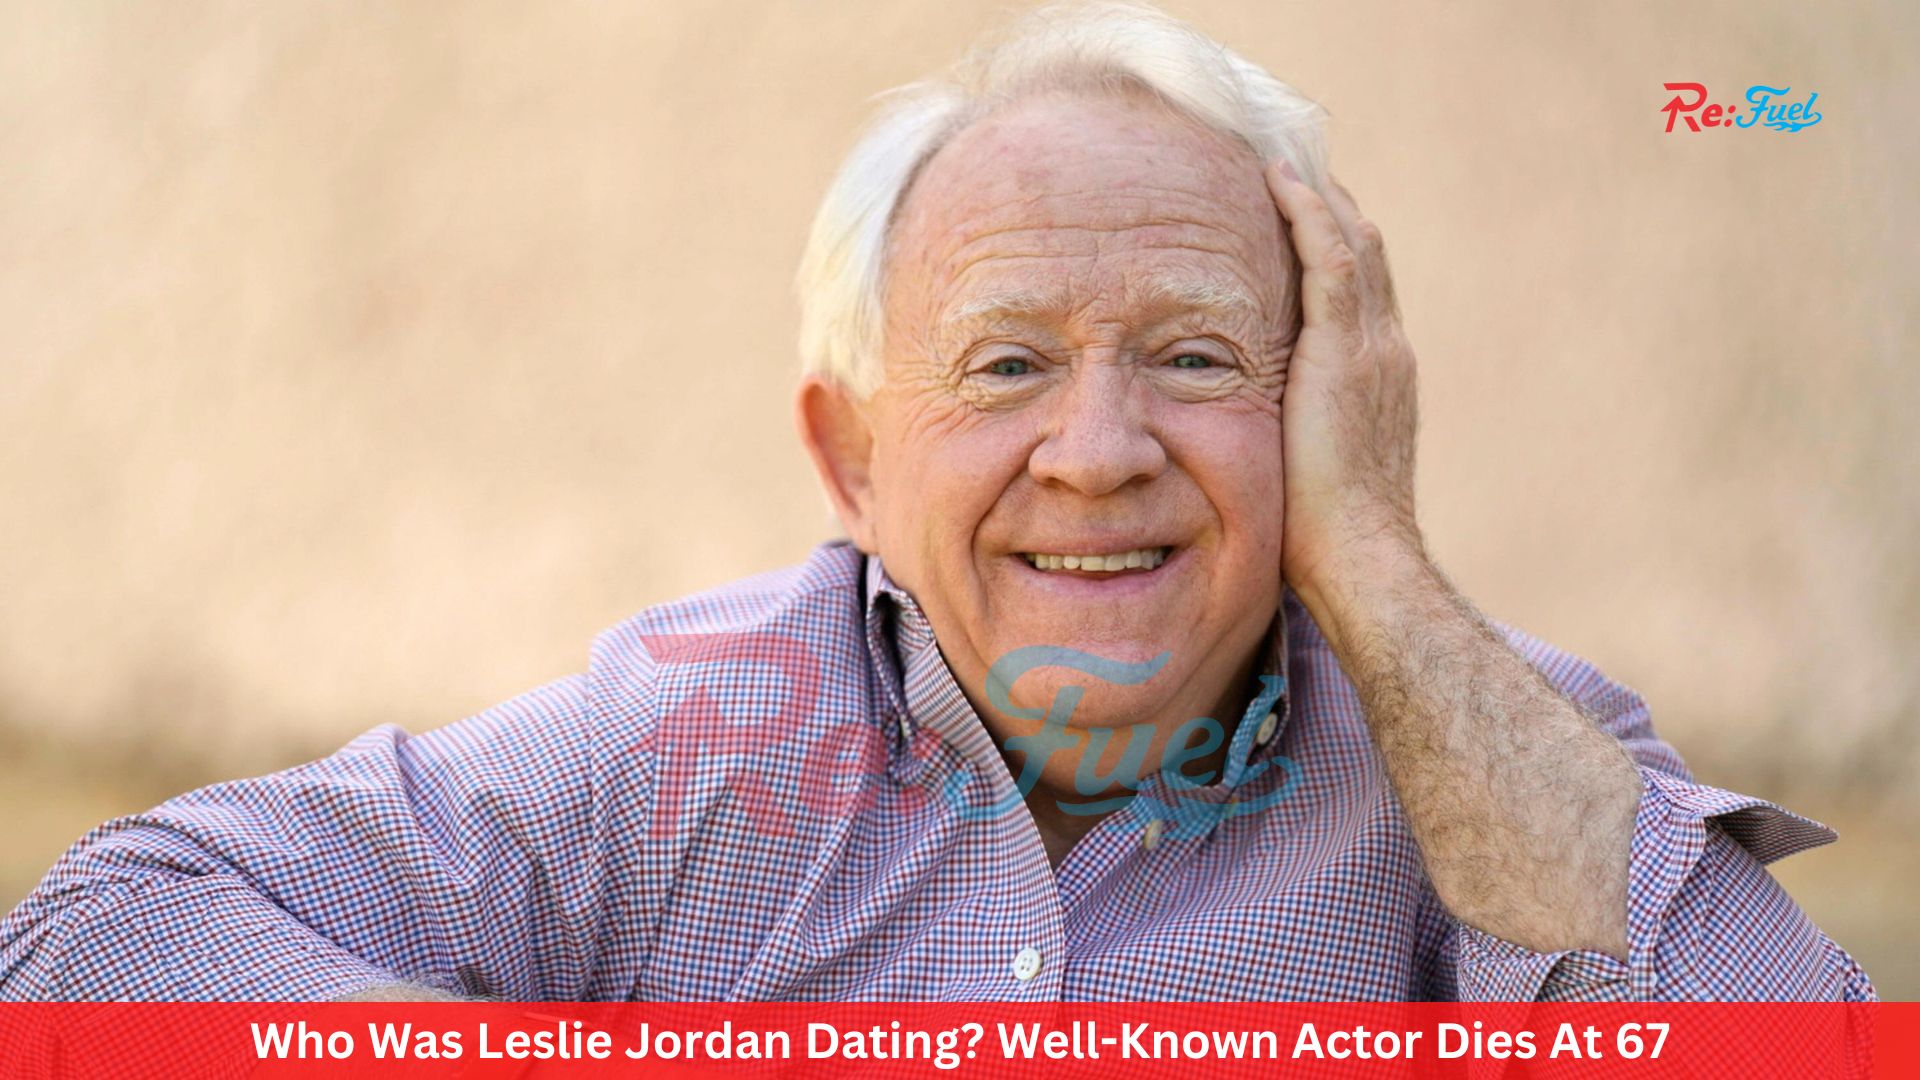 Who Was Leslie Jordan Dating? Well-Known Actor Dies At 67